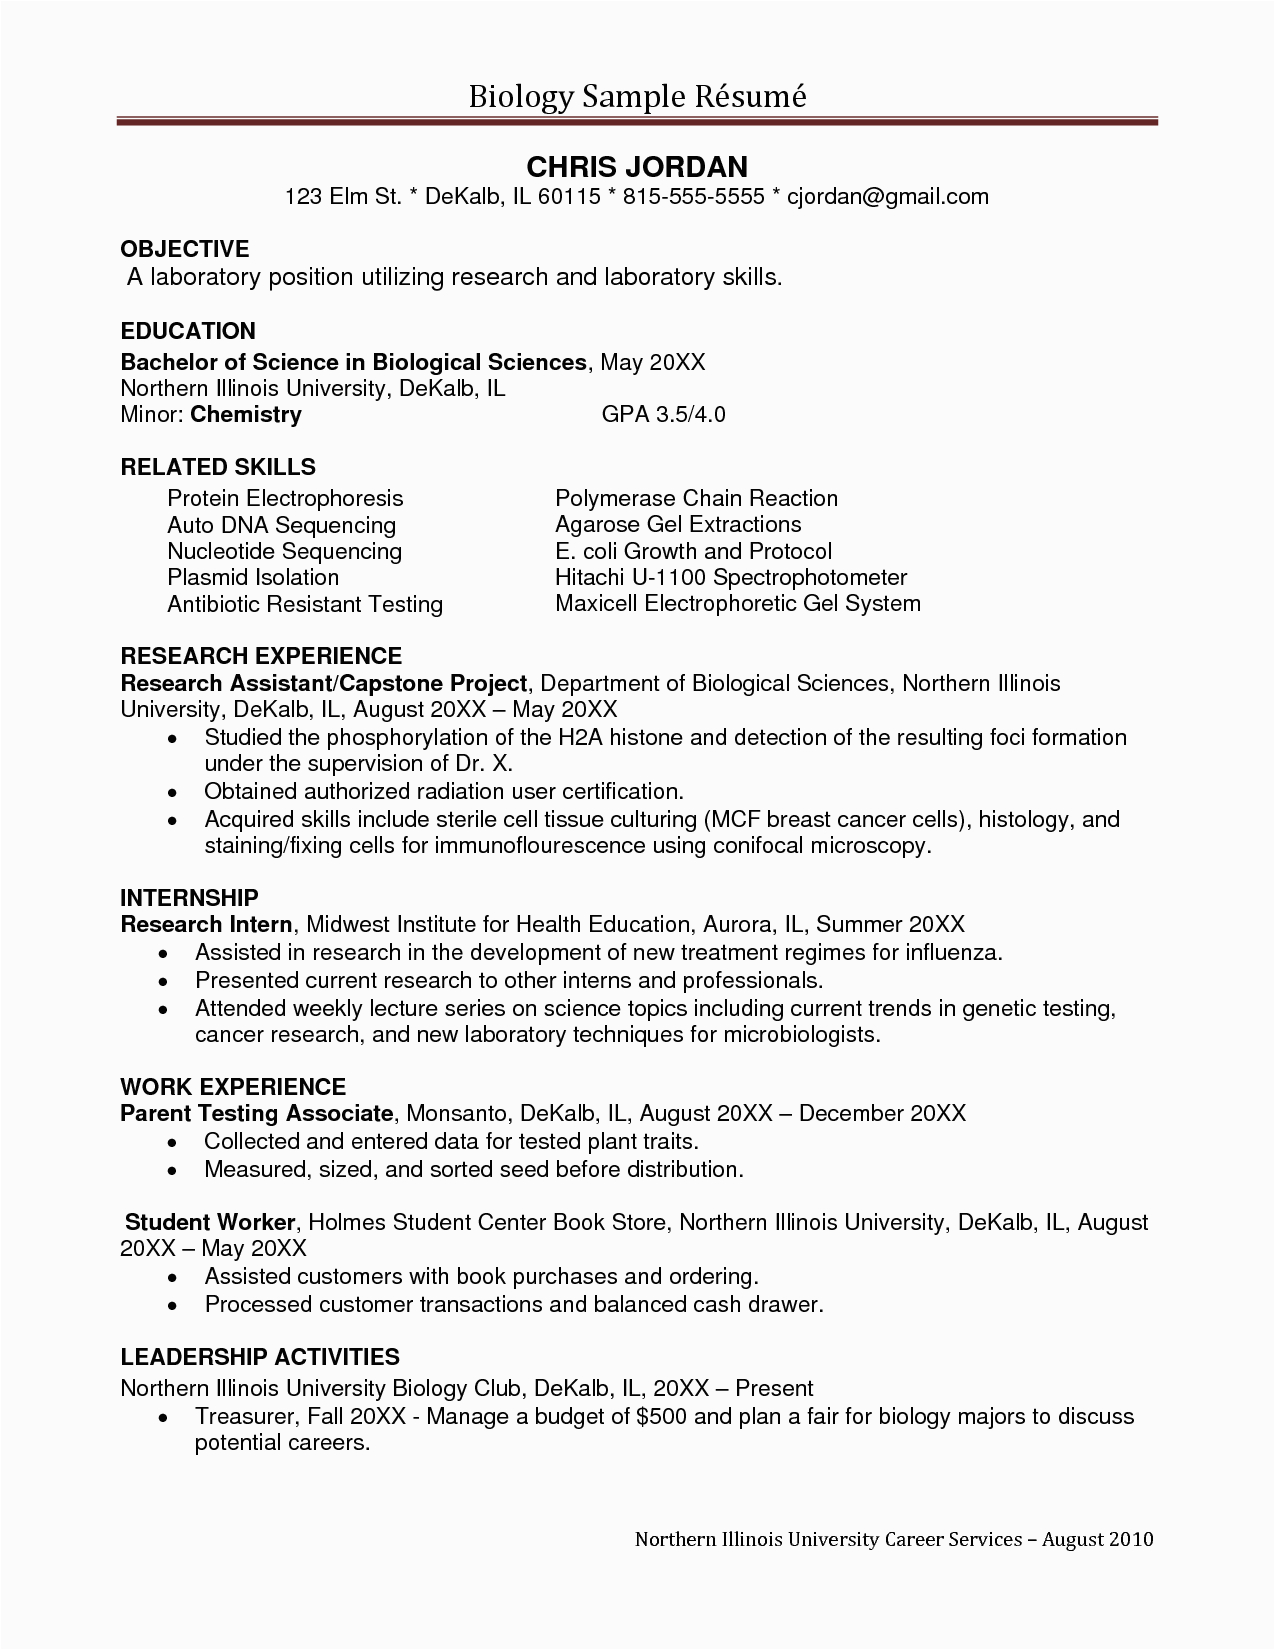 Administrative Works Research assistant Resume Sample Research assistant Resume Sample Objective